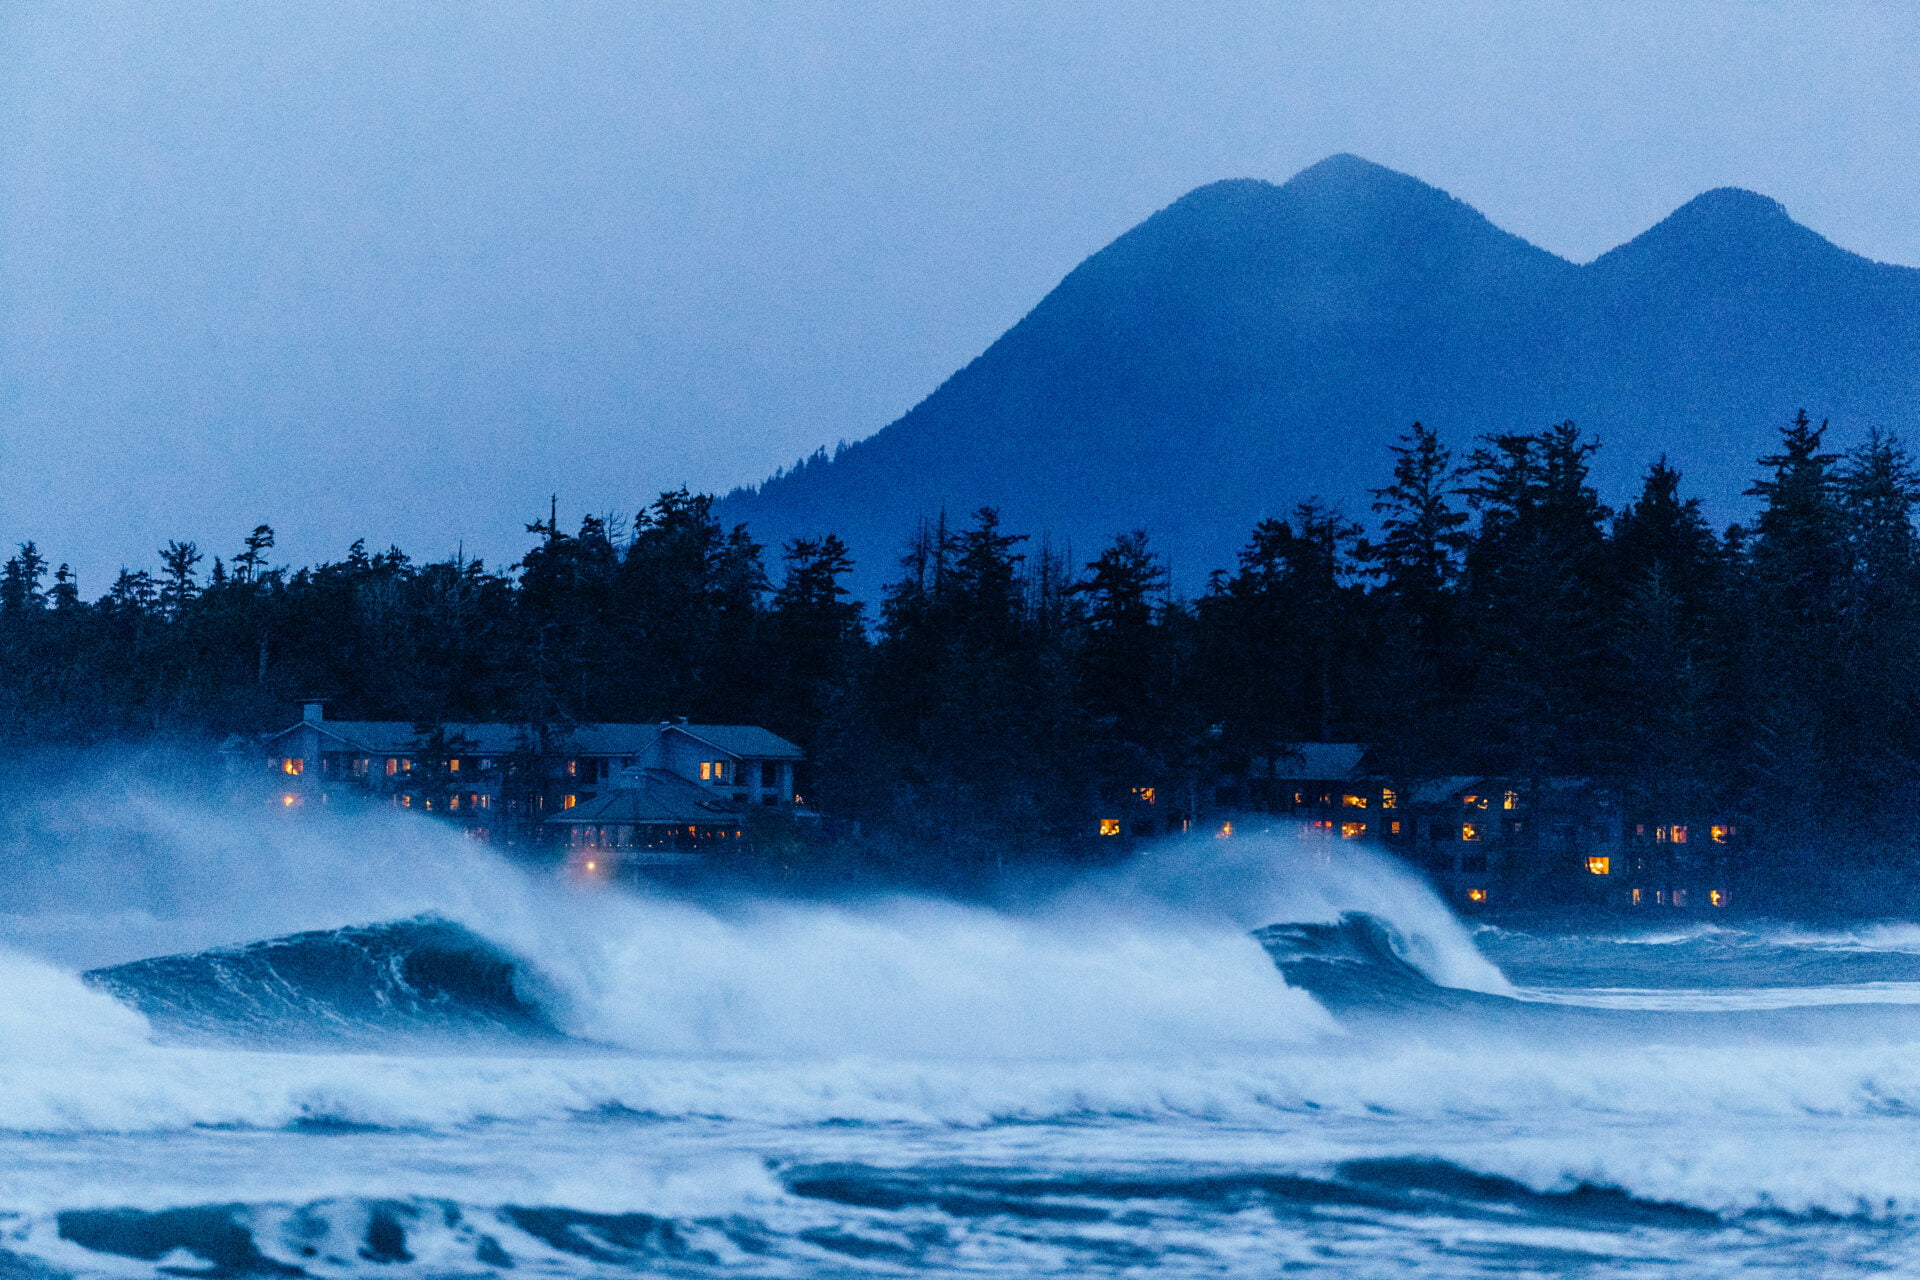 dark and moody photo of the best storm watching hotel in tofino taken from the ocean with large waves crashing